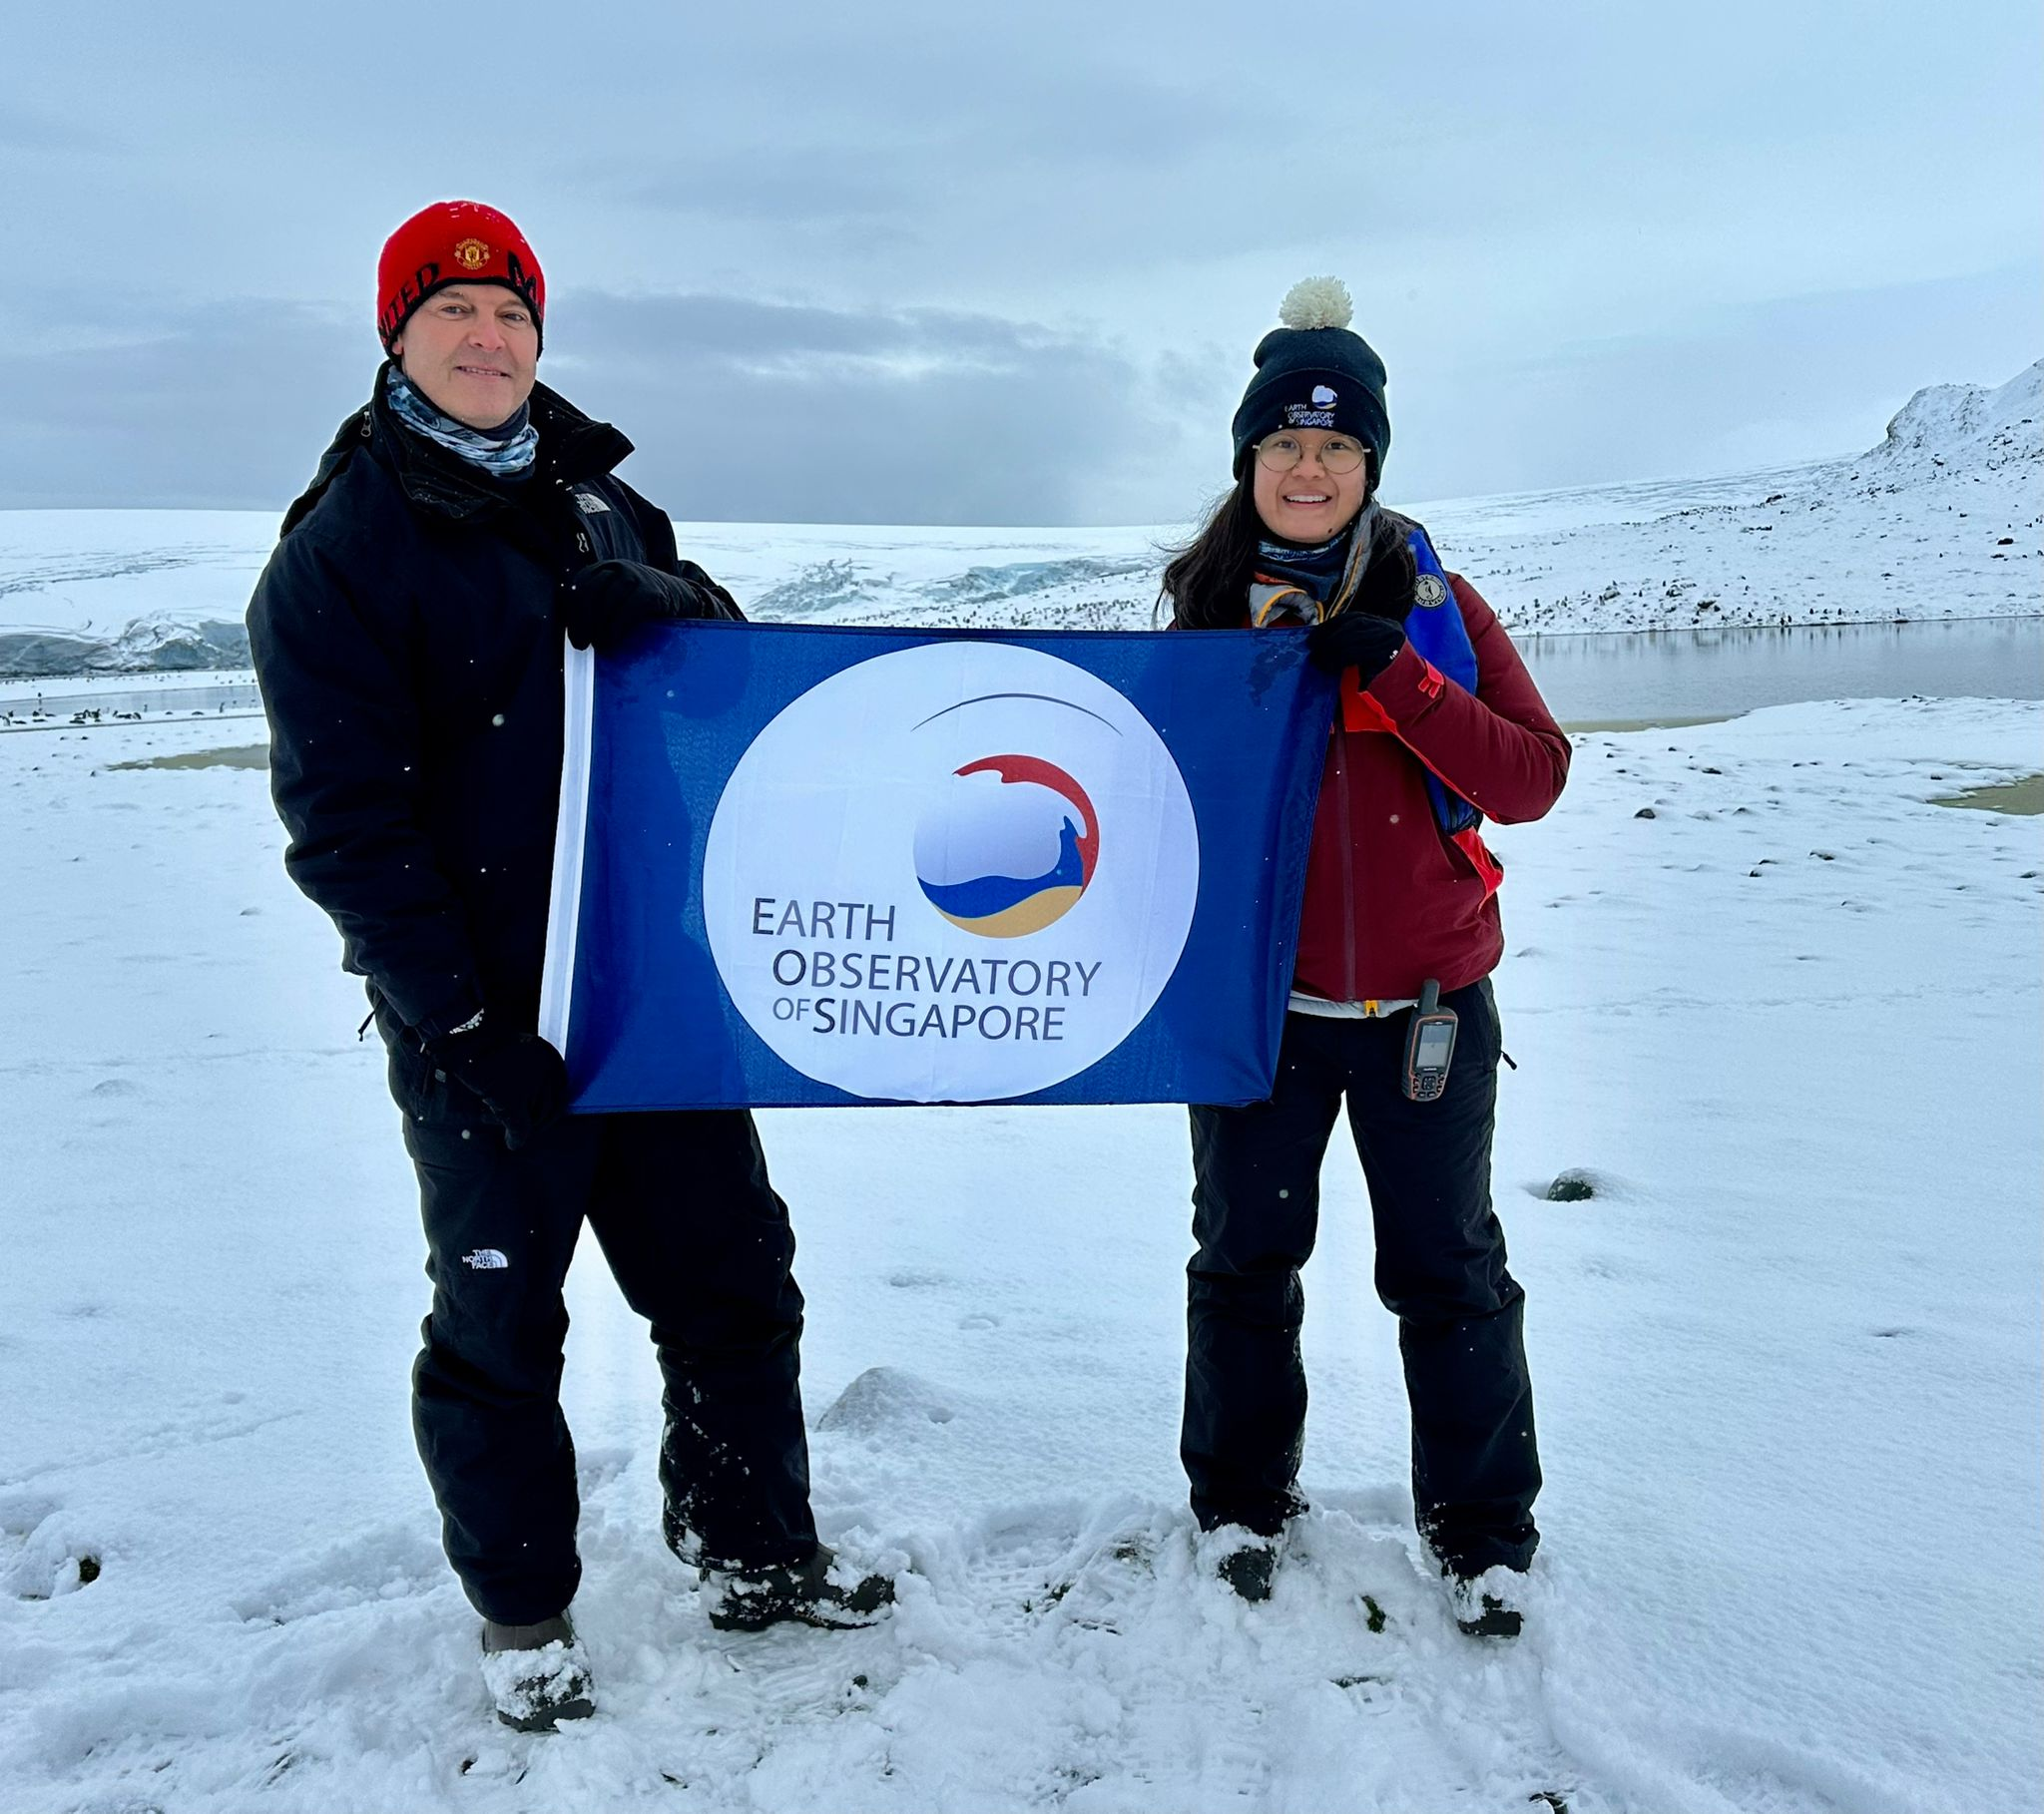 Saturday Mornings: Findings from Singapore's first-ever climate expedition to Antarctica